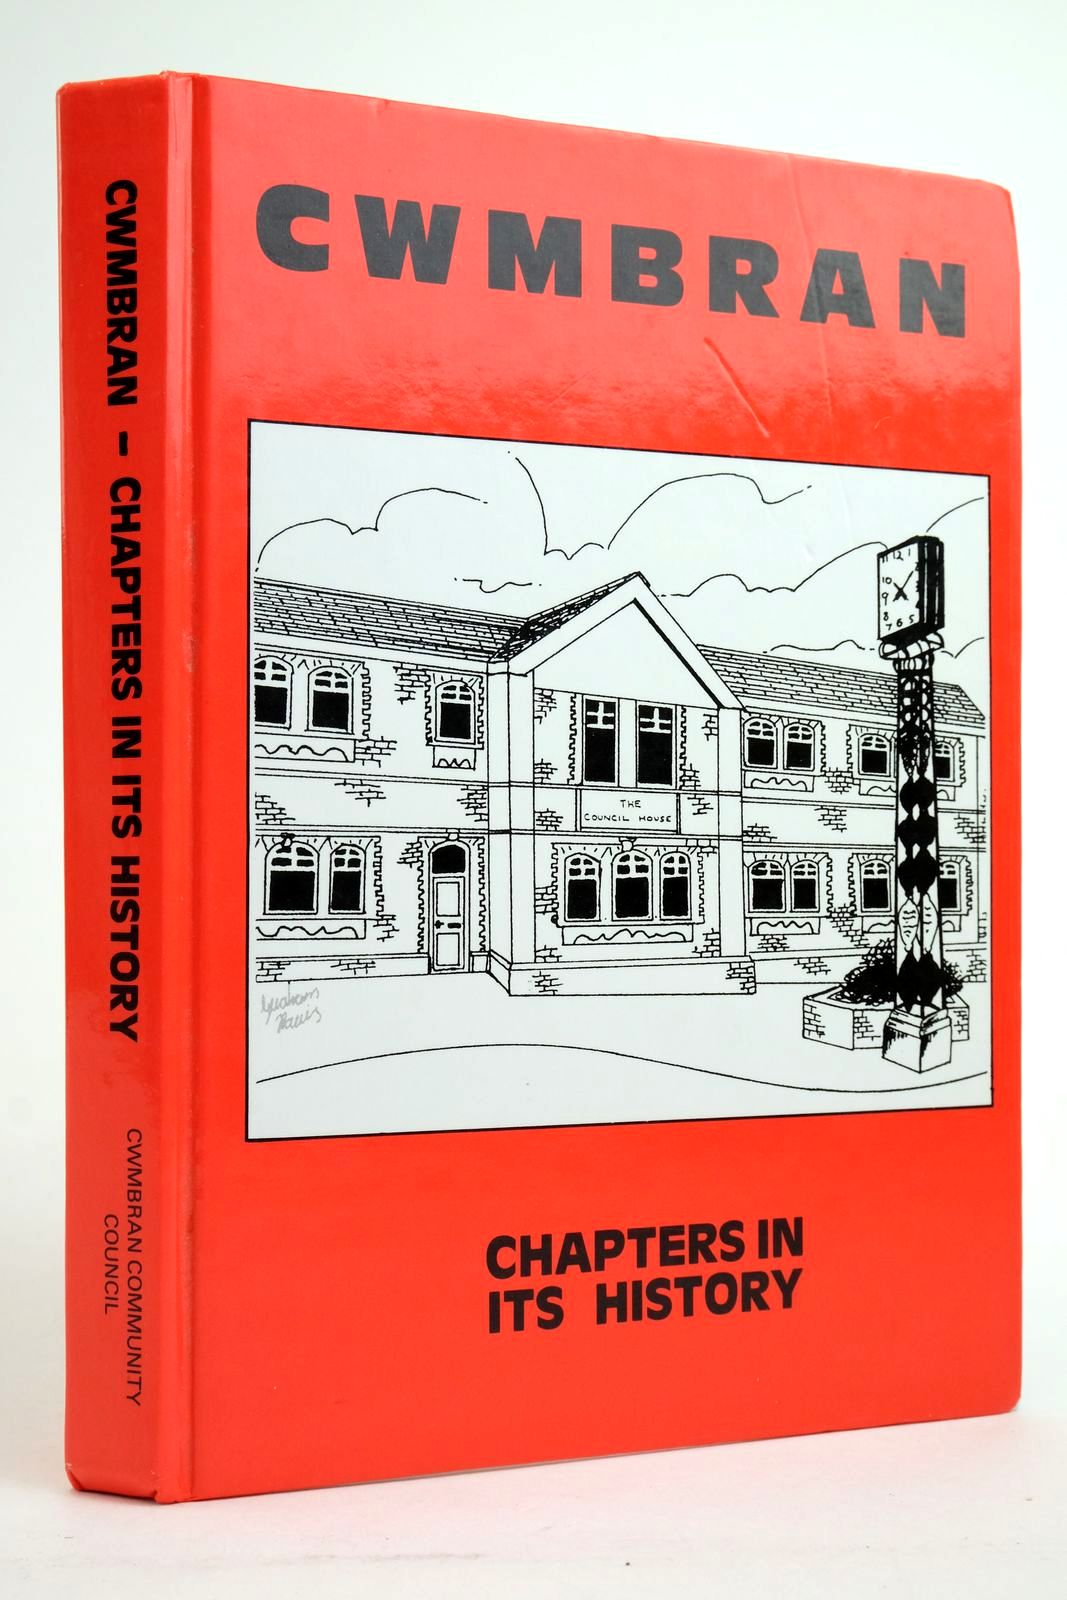 Photo of CWMBRAN CHAPTERS IN ITS HISTORY published by Cwmbran Community Council (STOCK CODE: 2135798)  for sale by Stella & Rose's Books